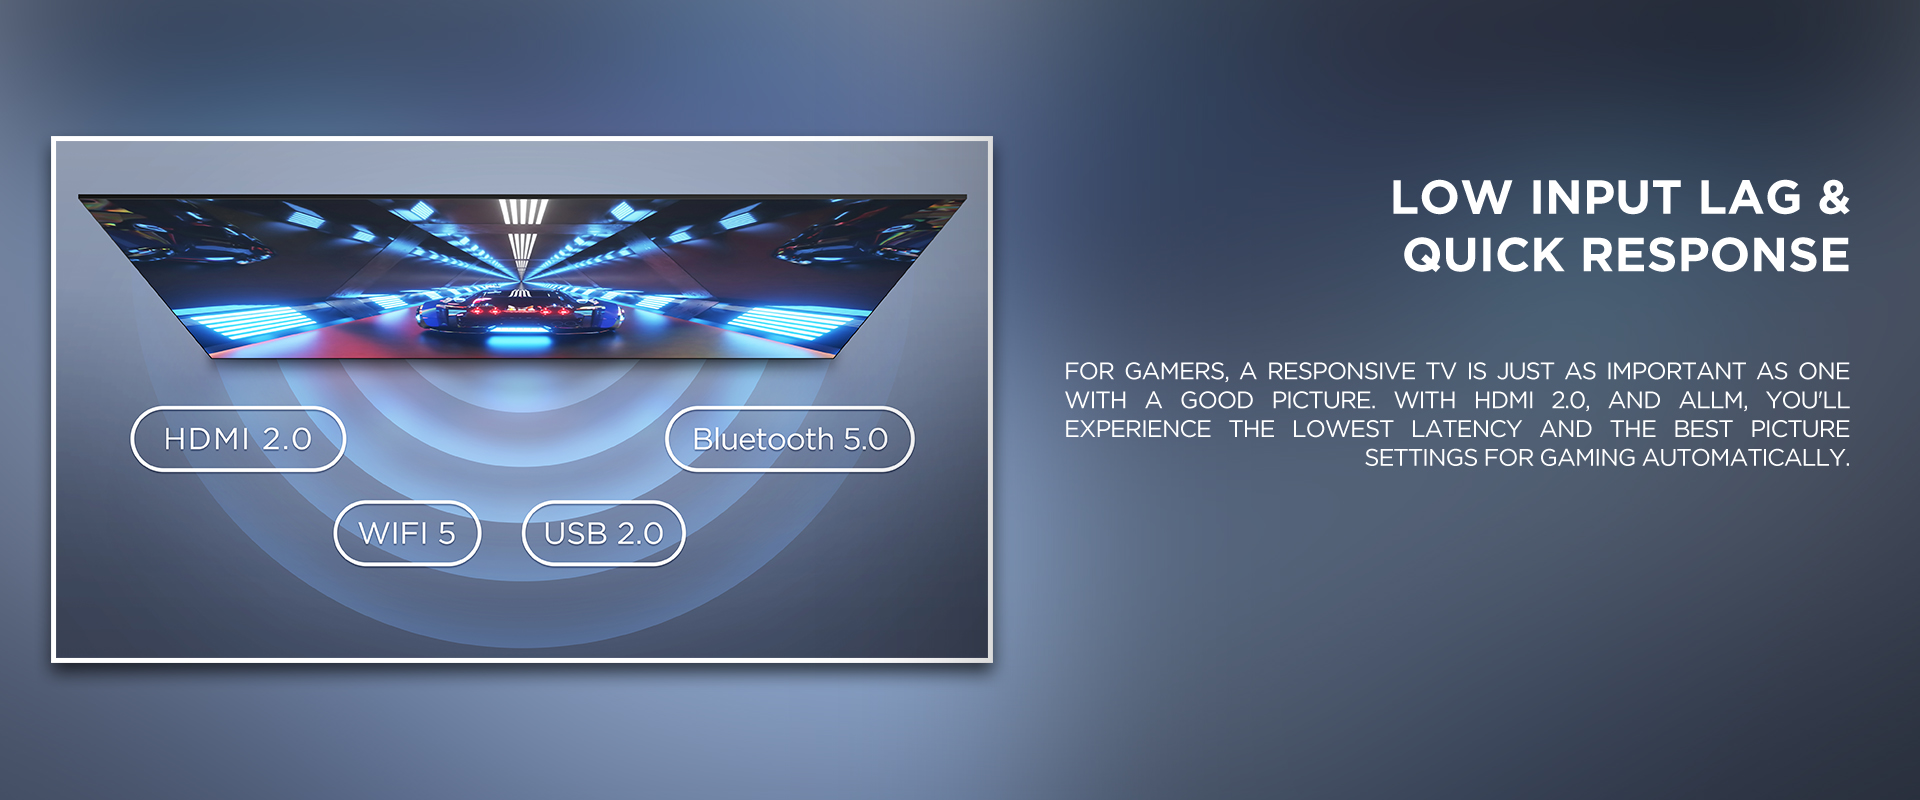 LOW INPUT LAG & QUICK RESPONSE - For gamers, a responsive TV is just as important as one with a good picture. With HDMI 2.0, and ALLM, you'll experience the lowest latency and the best picture settings for gaming automatically.